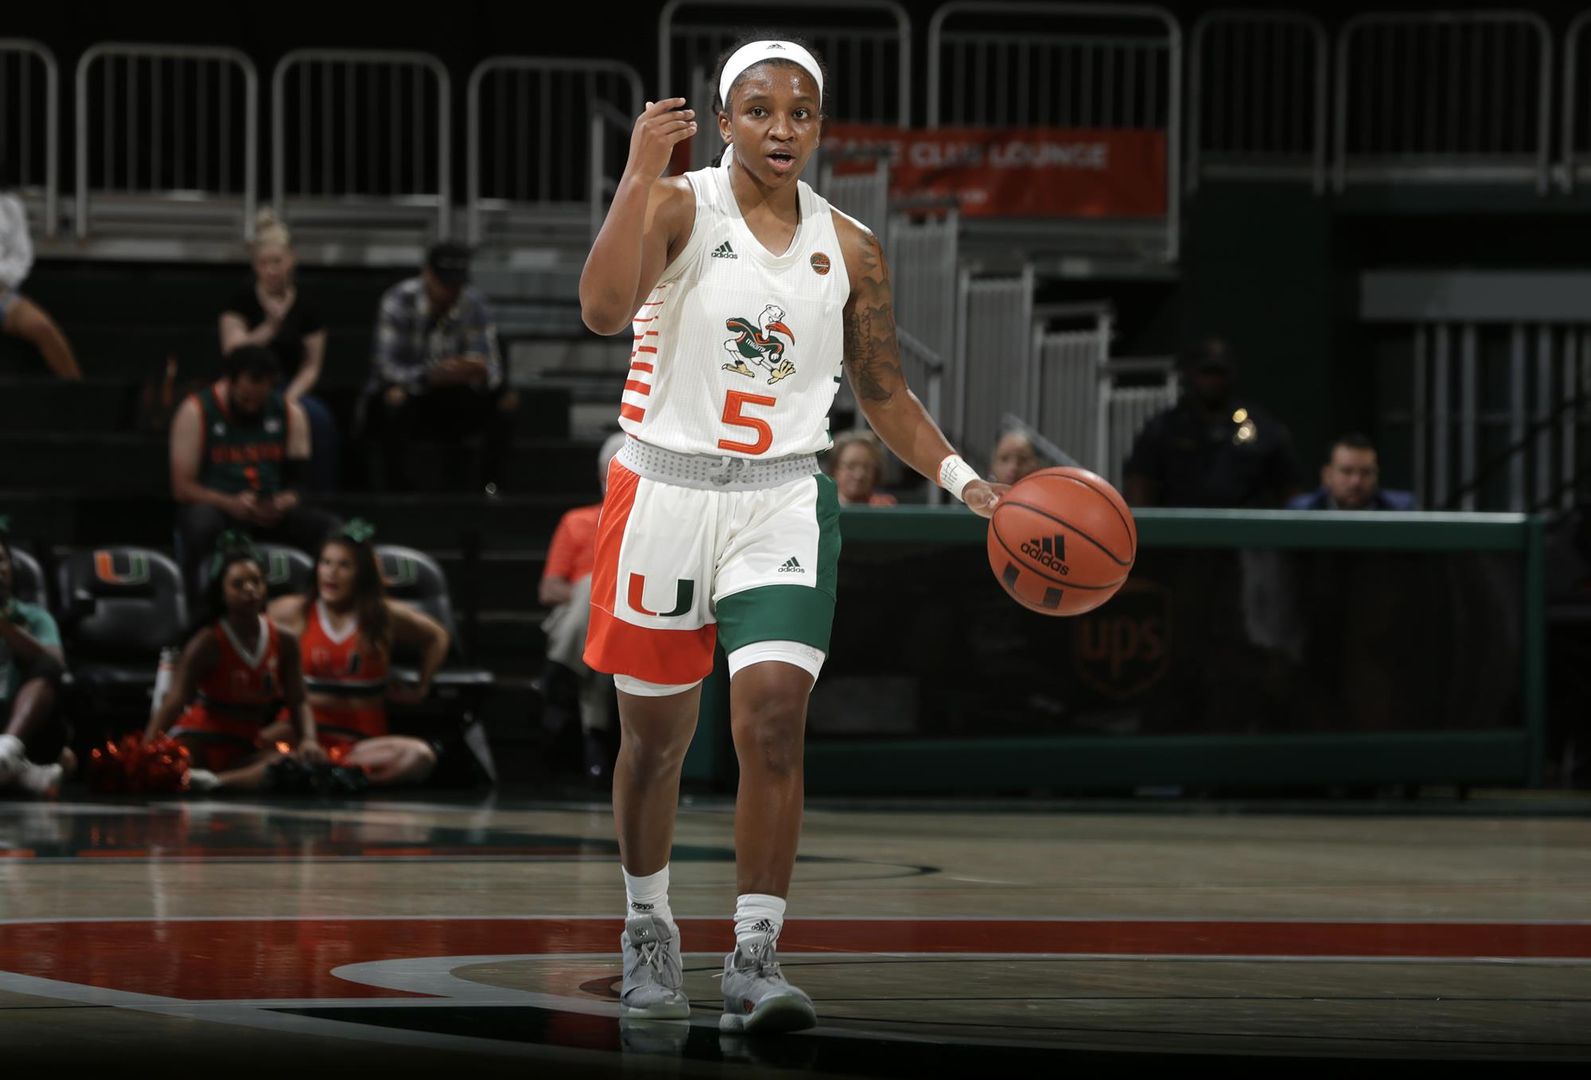 Canes Looking for First ACC Road Win on Sunday